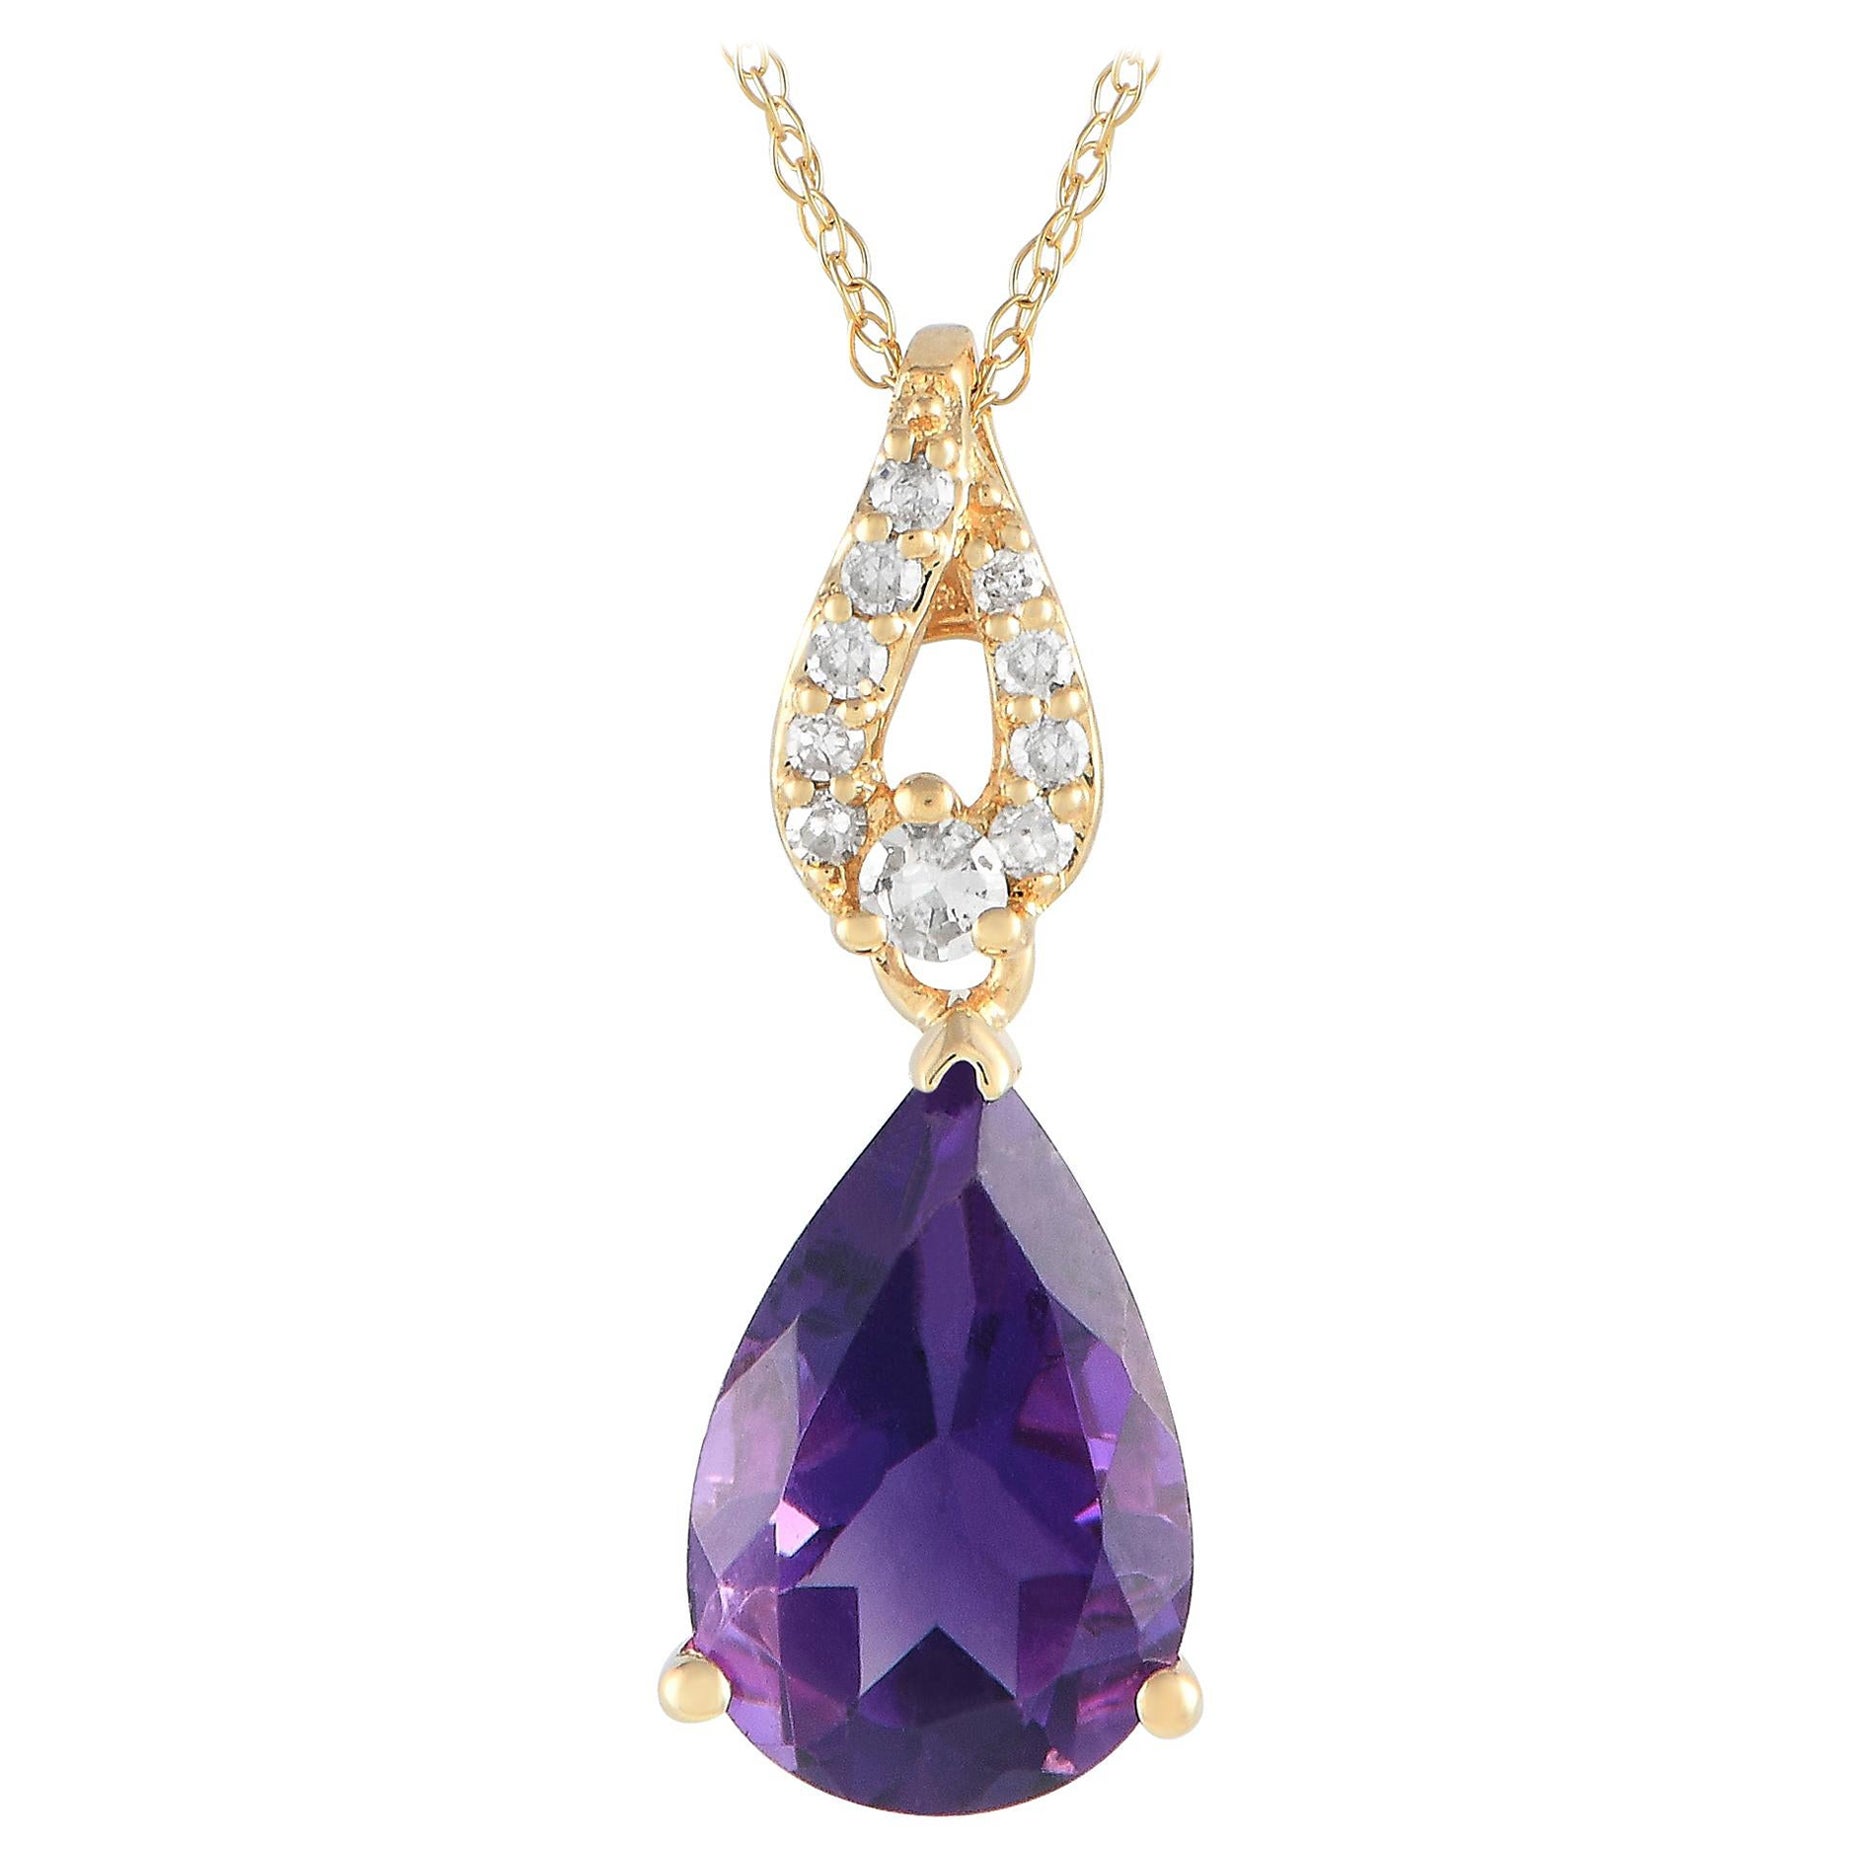 LB Exclusive 14K Yellow Gold 0.06ct Diamond and Amethyst Necklace PD4-16184YAM For Sale